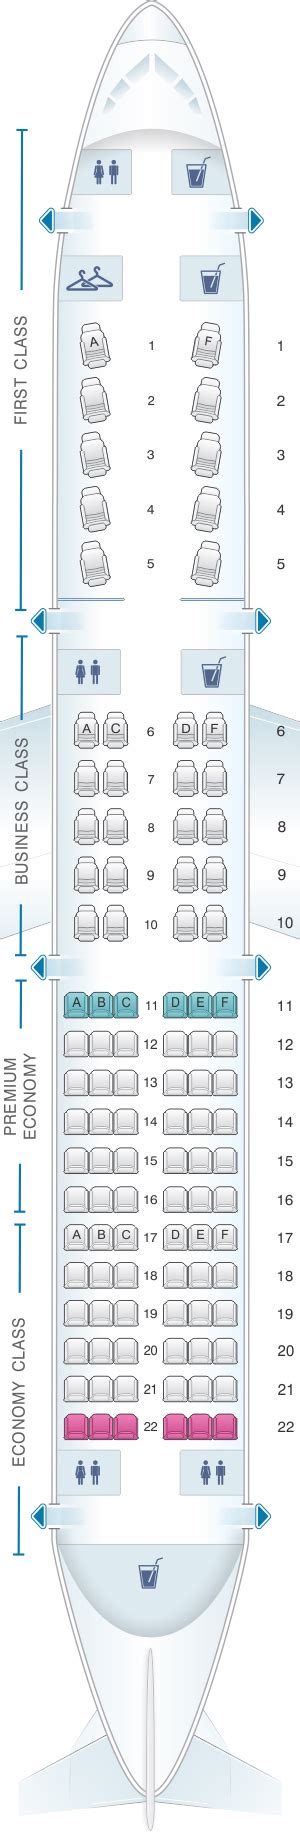 Airbus A321 Transcon Seat Map